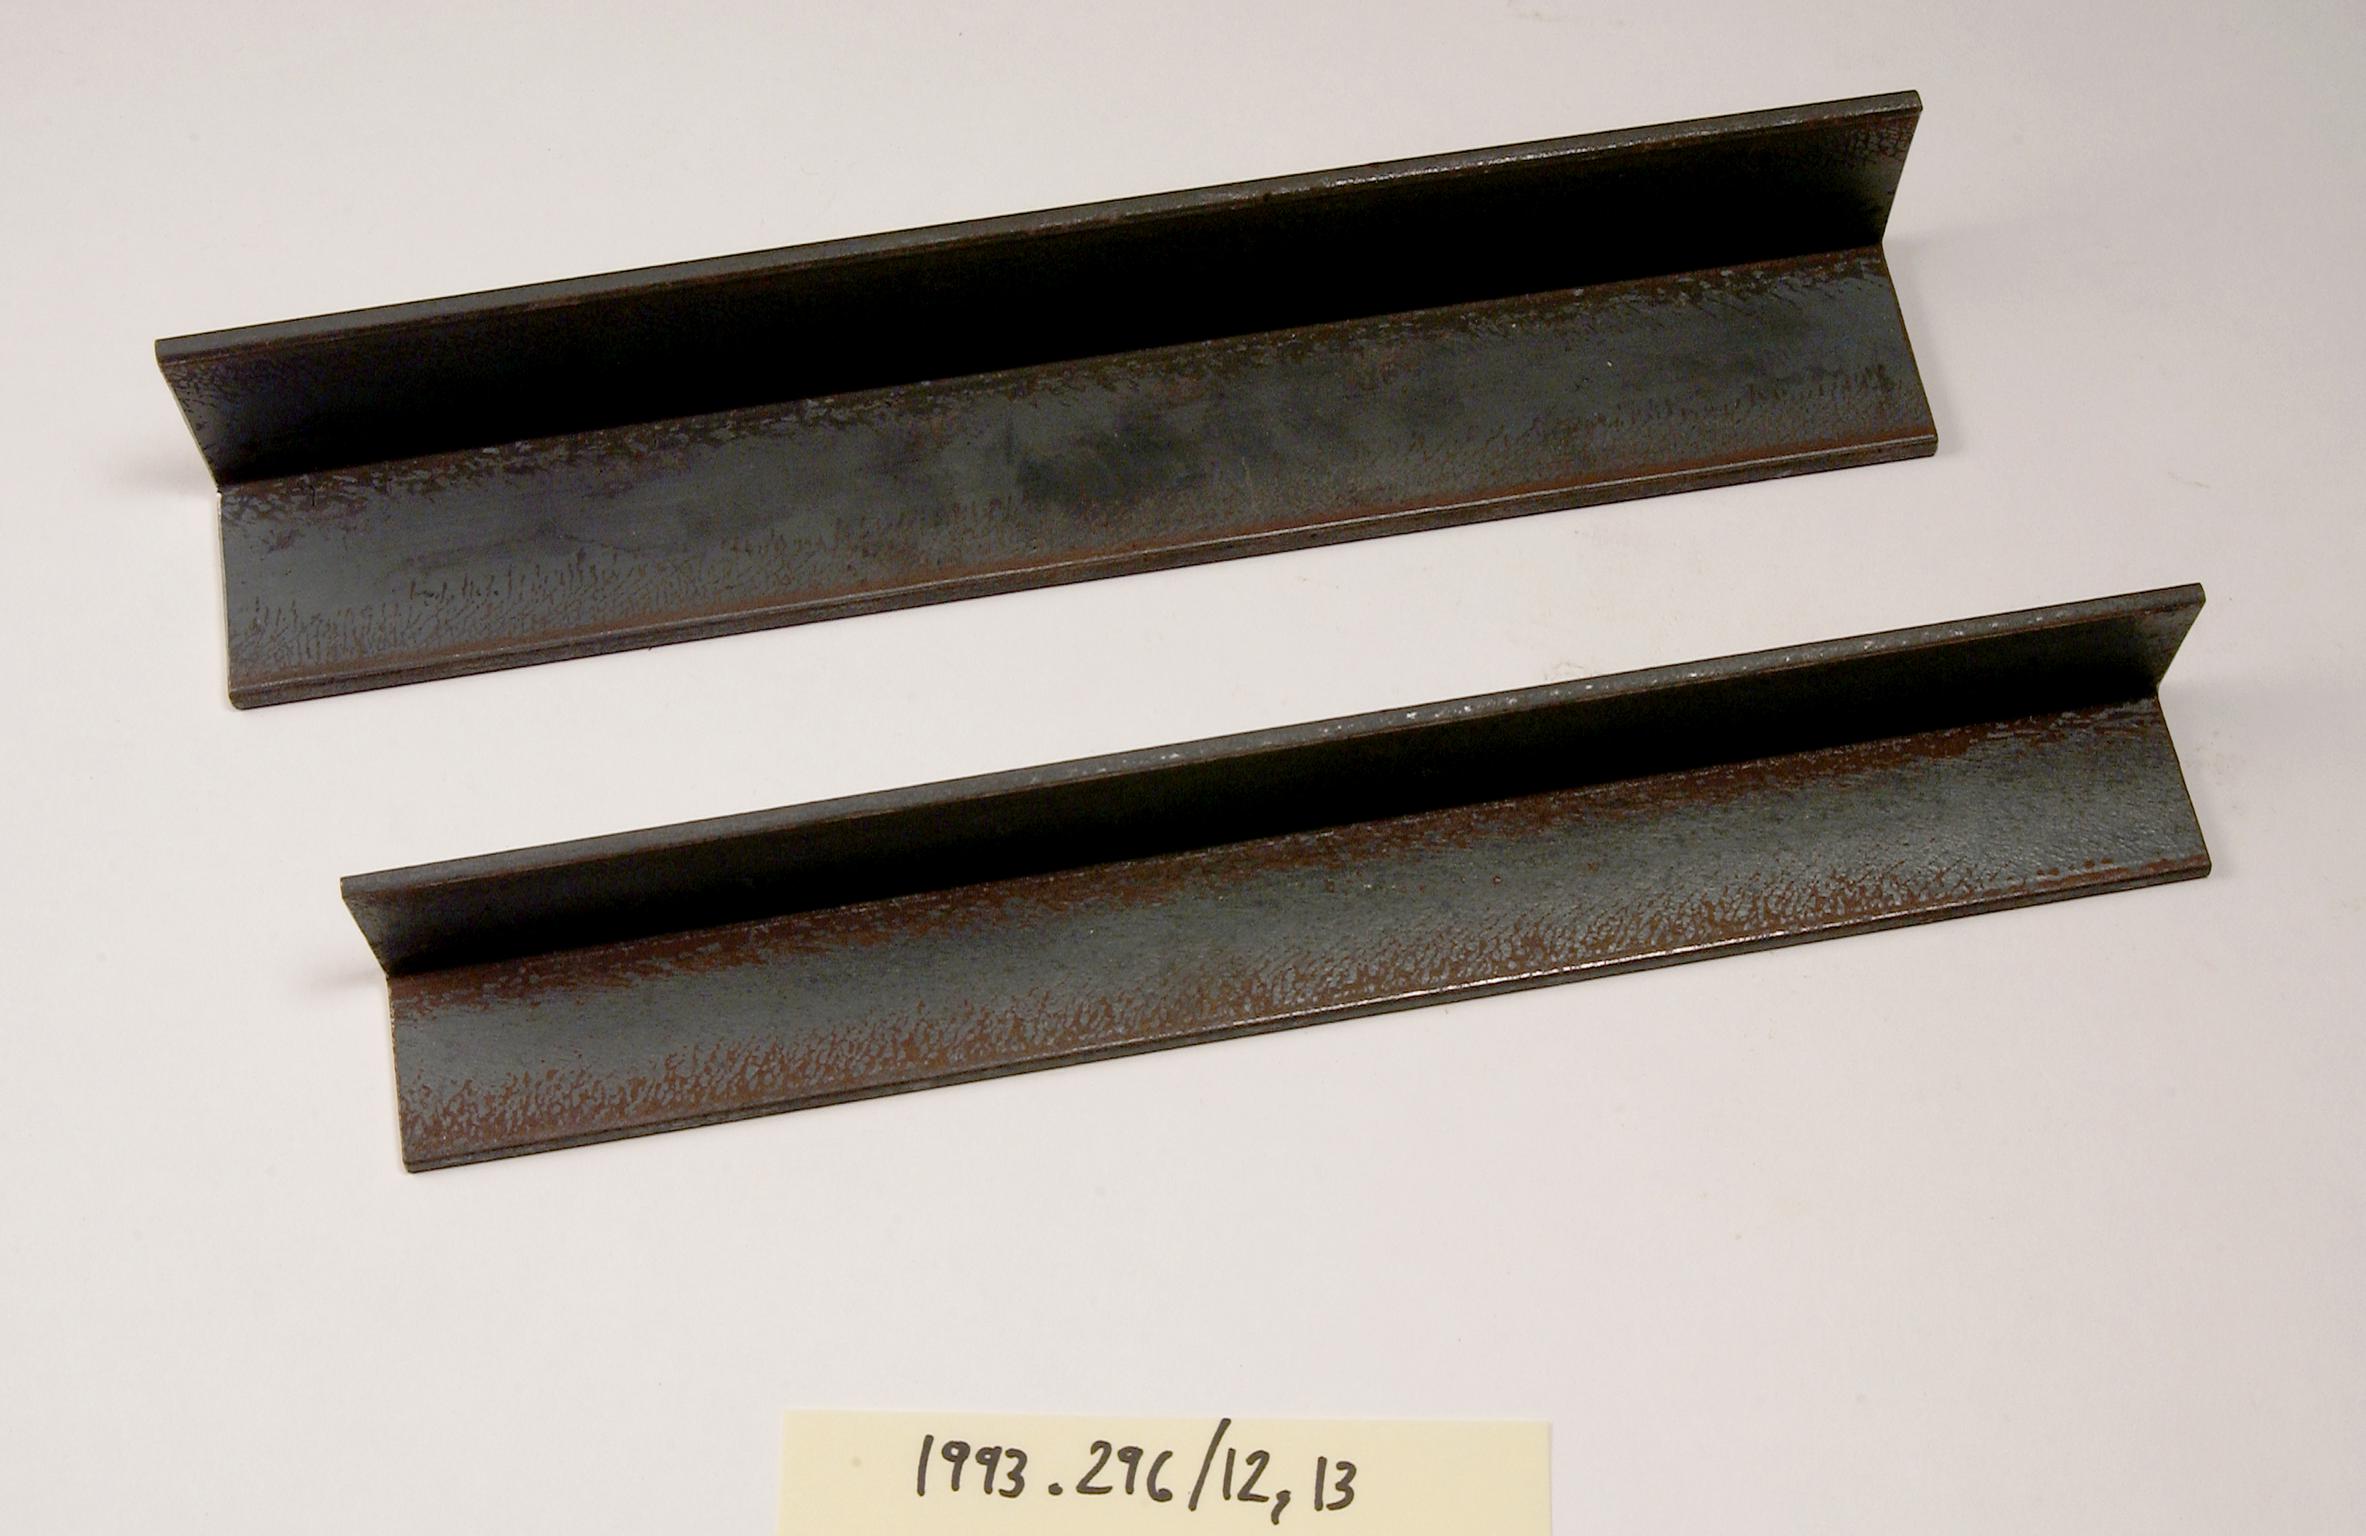 Samples of steel angle - 'L' cross section